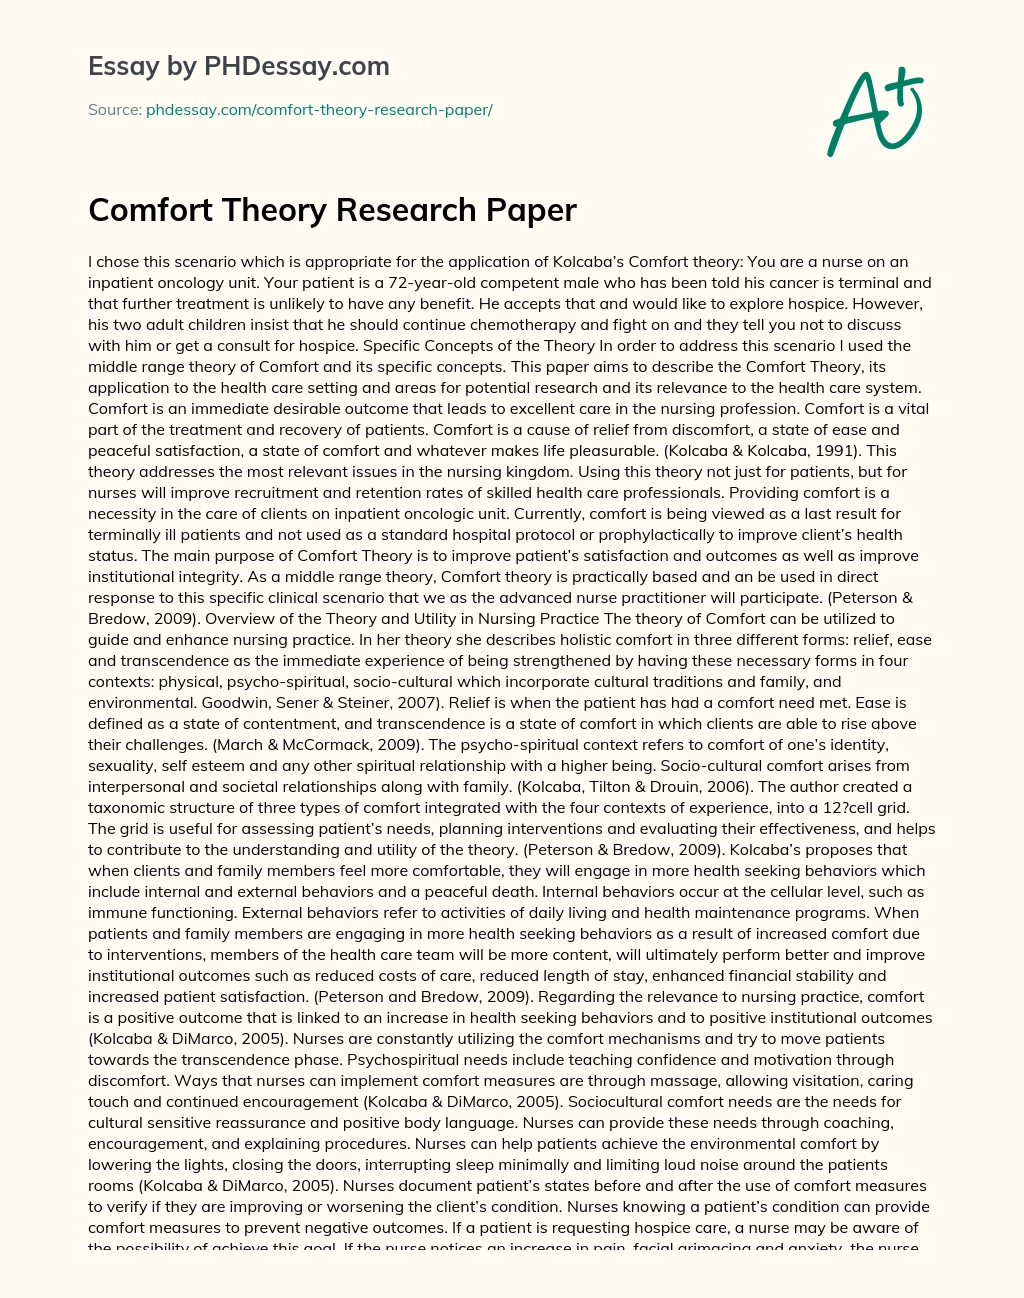 Comfort Theory Research Paper essay